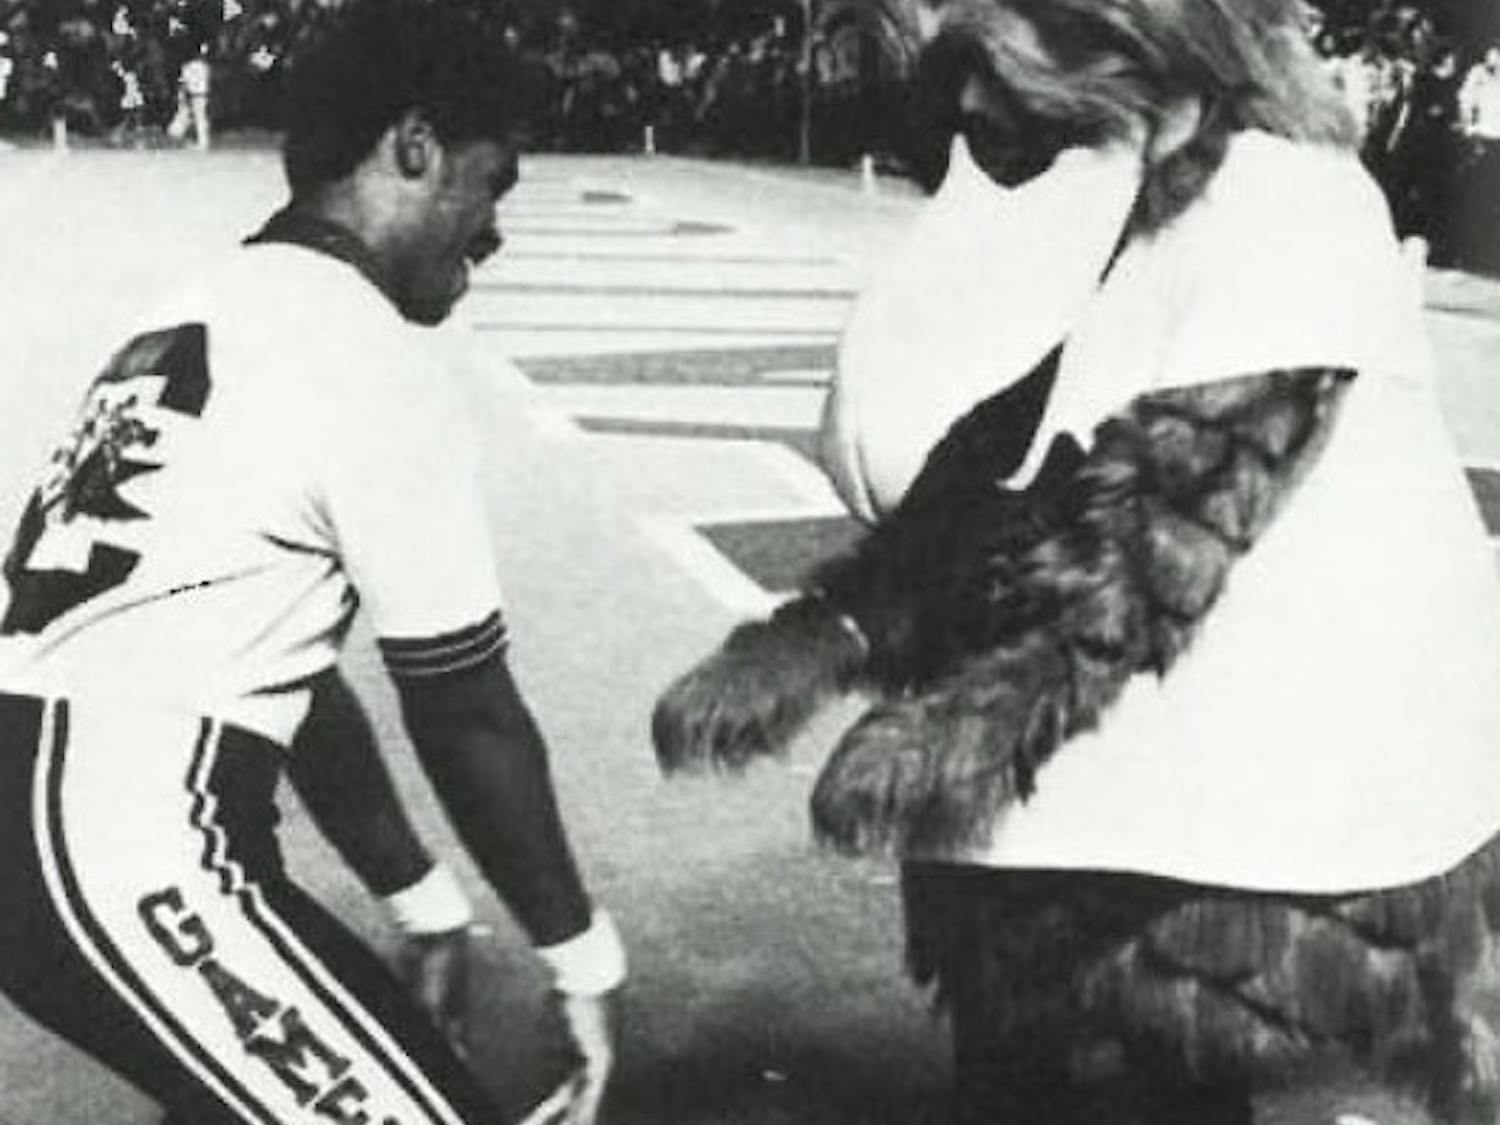 Cocky often performed with the cheerleaders. His soft and fun demeanor, though disliked by many at first, quickly grew on students with each appearance in the 1980s.&nbsp;